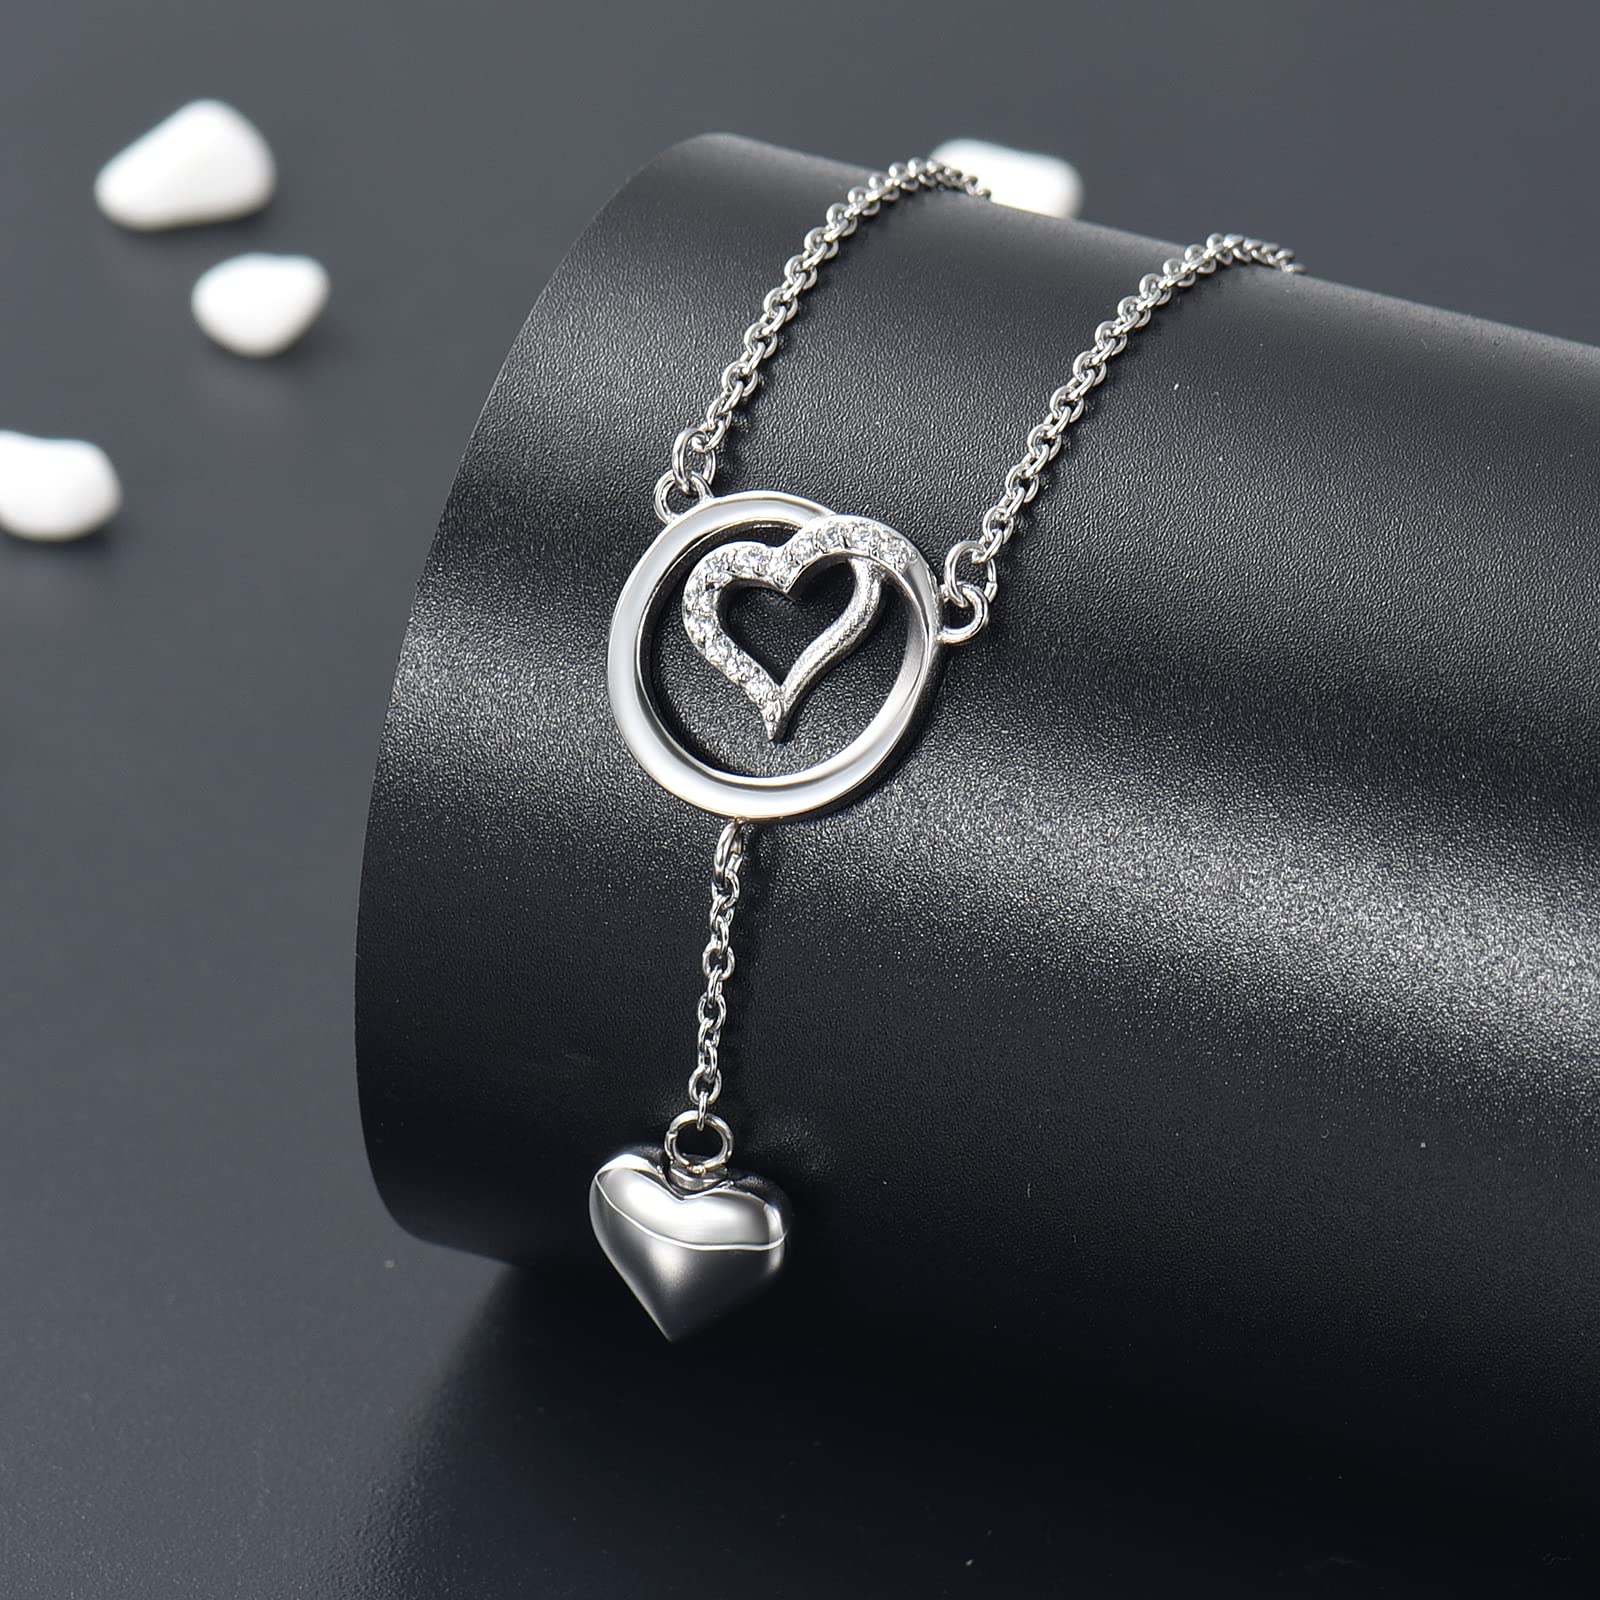 Heart Cremation Urn Necklace for Ashes Jewelry Memorial Circle Necklace - I Still Need You Close to Me - for Mom/Dad/Grandma/Grandpa